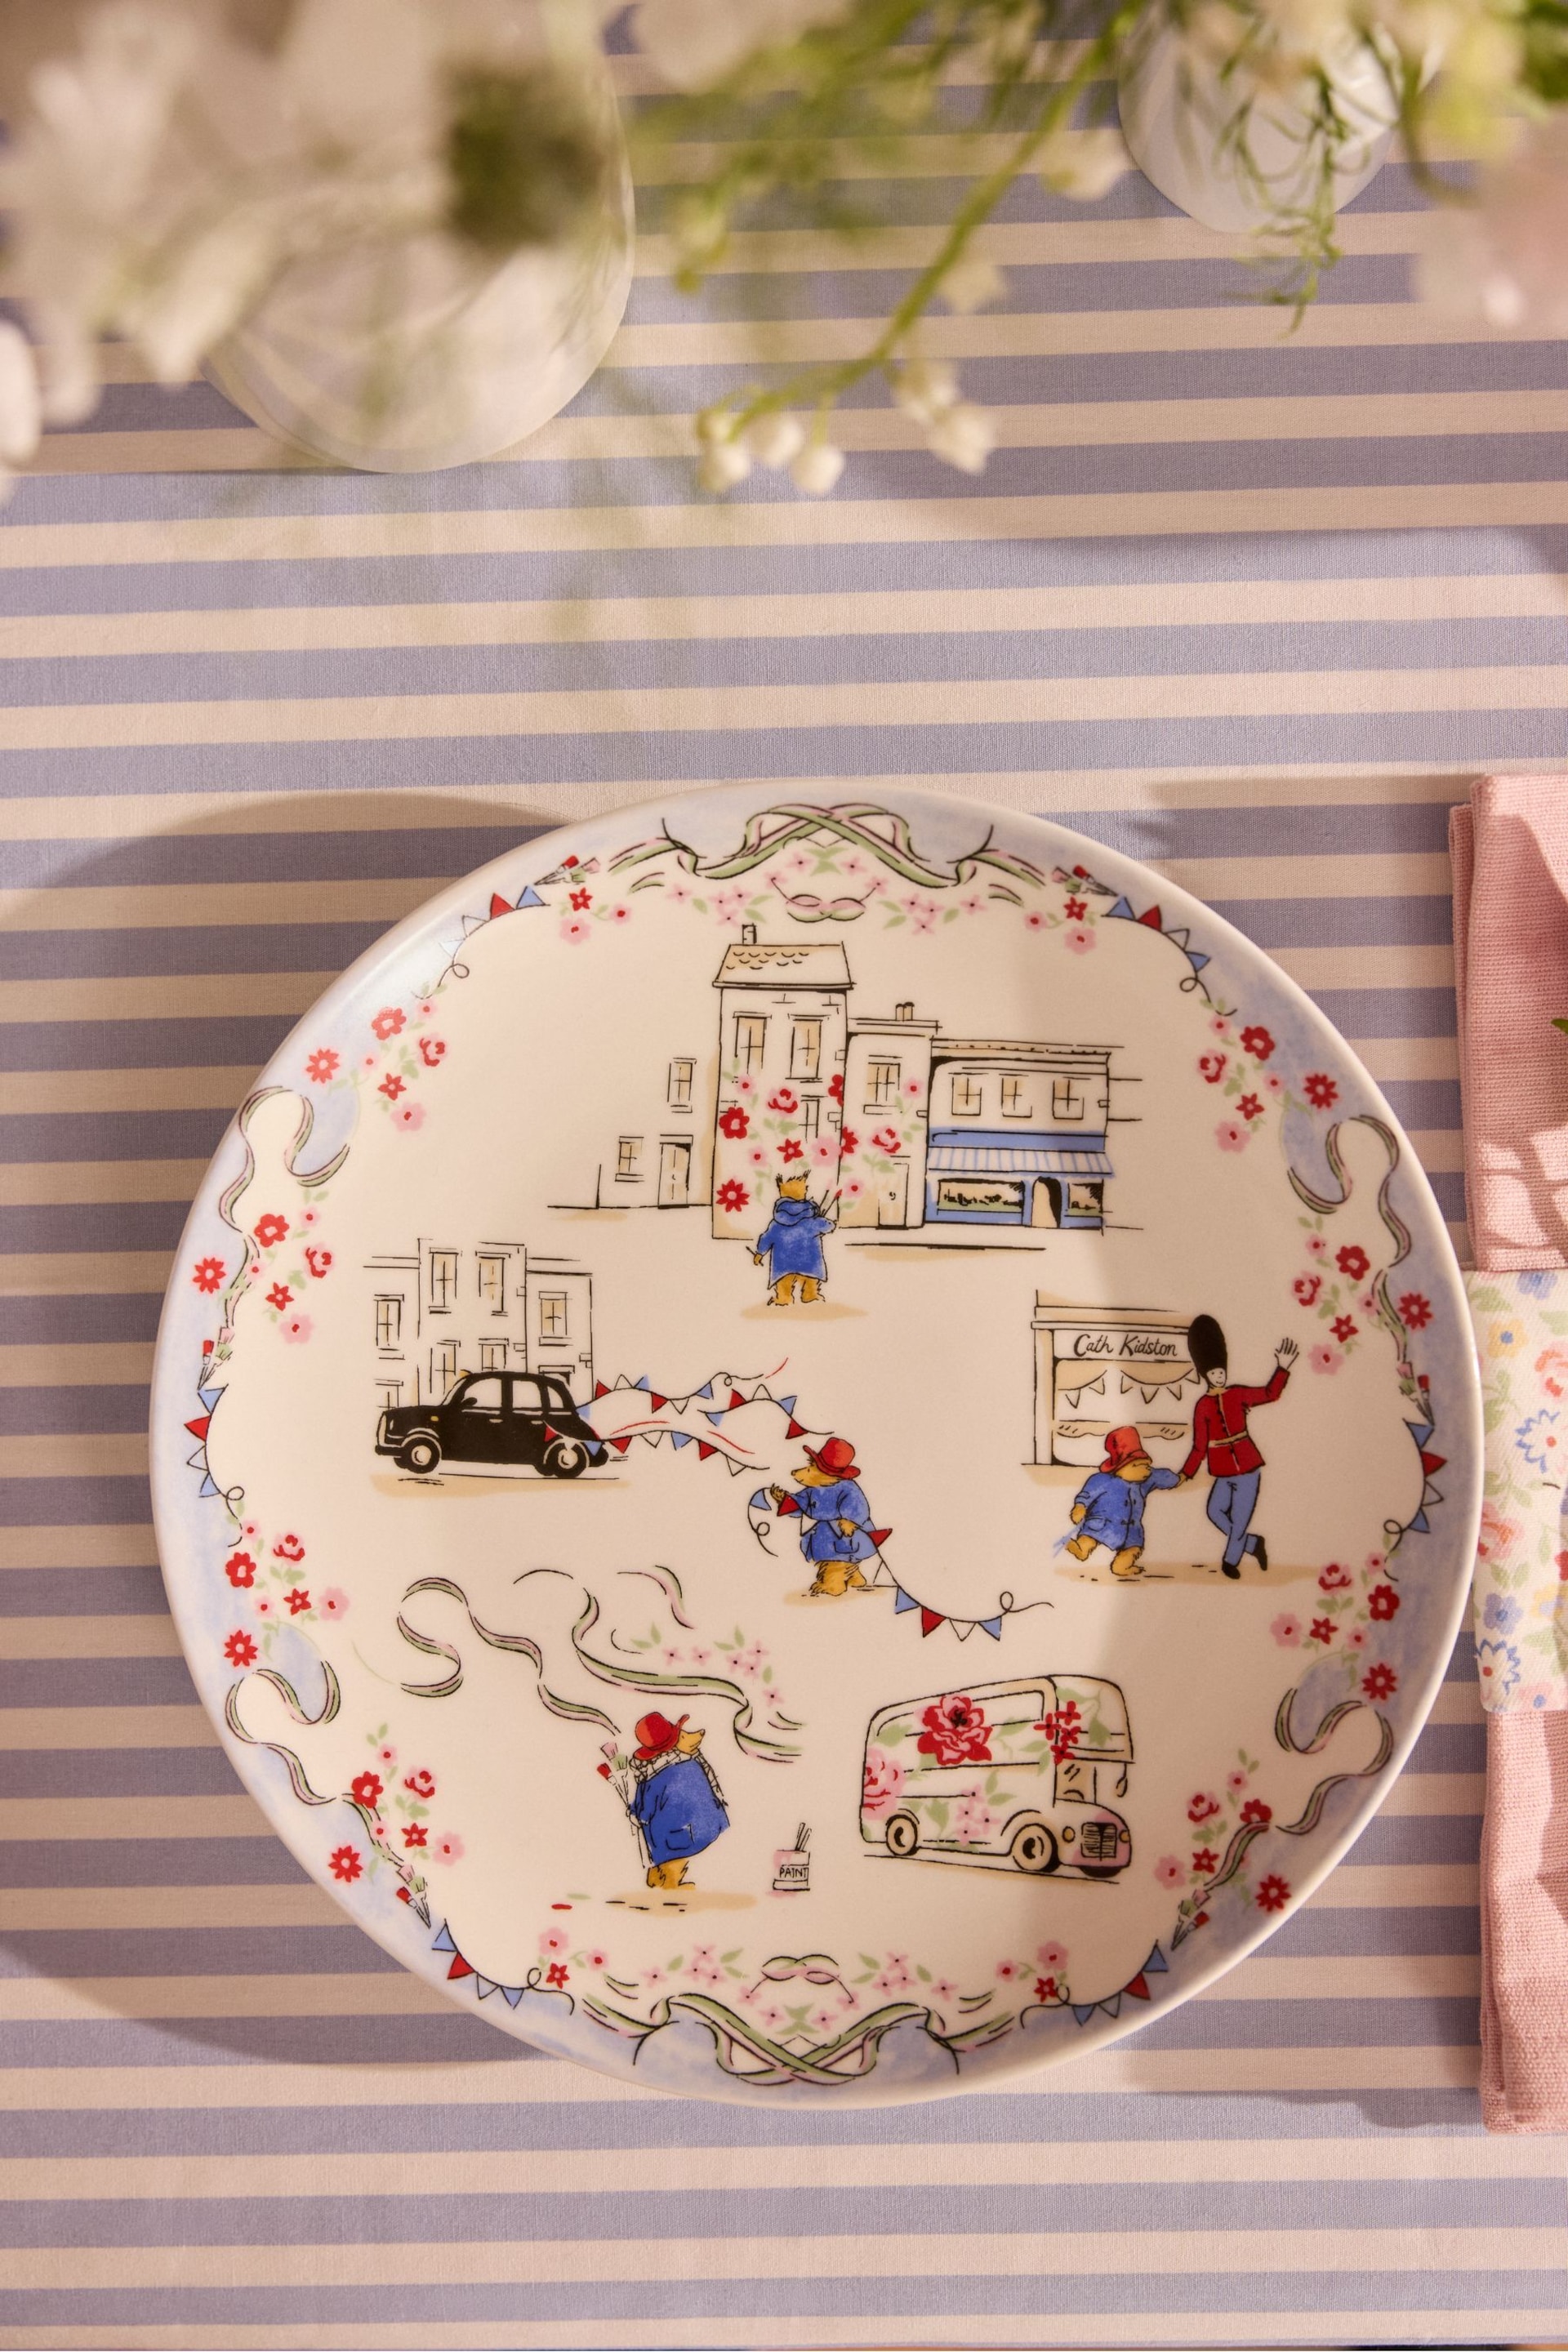 Cath Kidston Multi Paddington Goes to Town Side Plate - Image 1 of 15